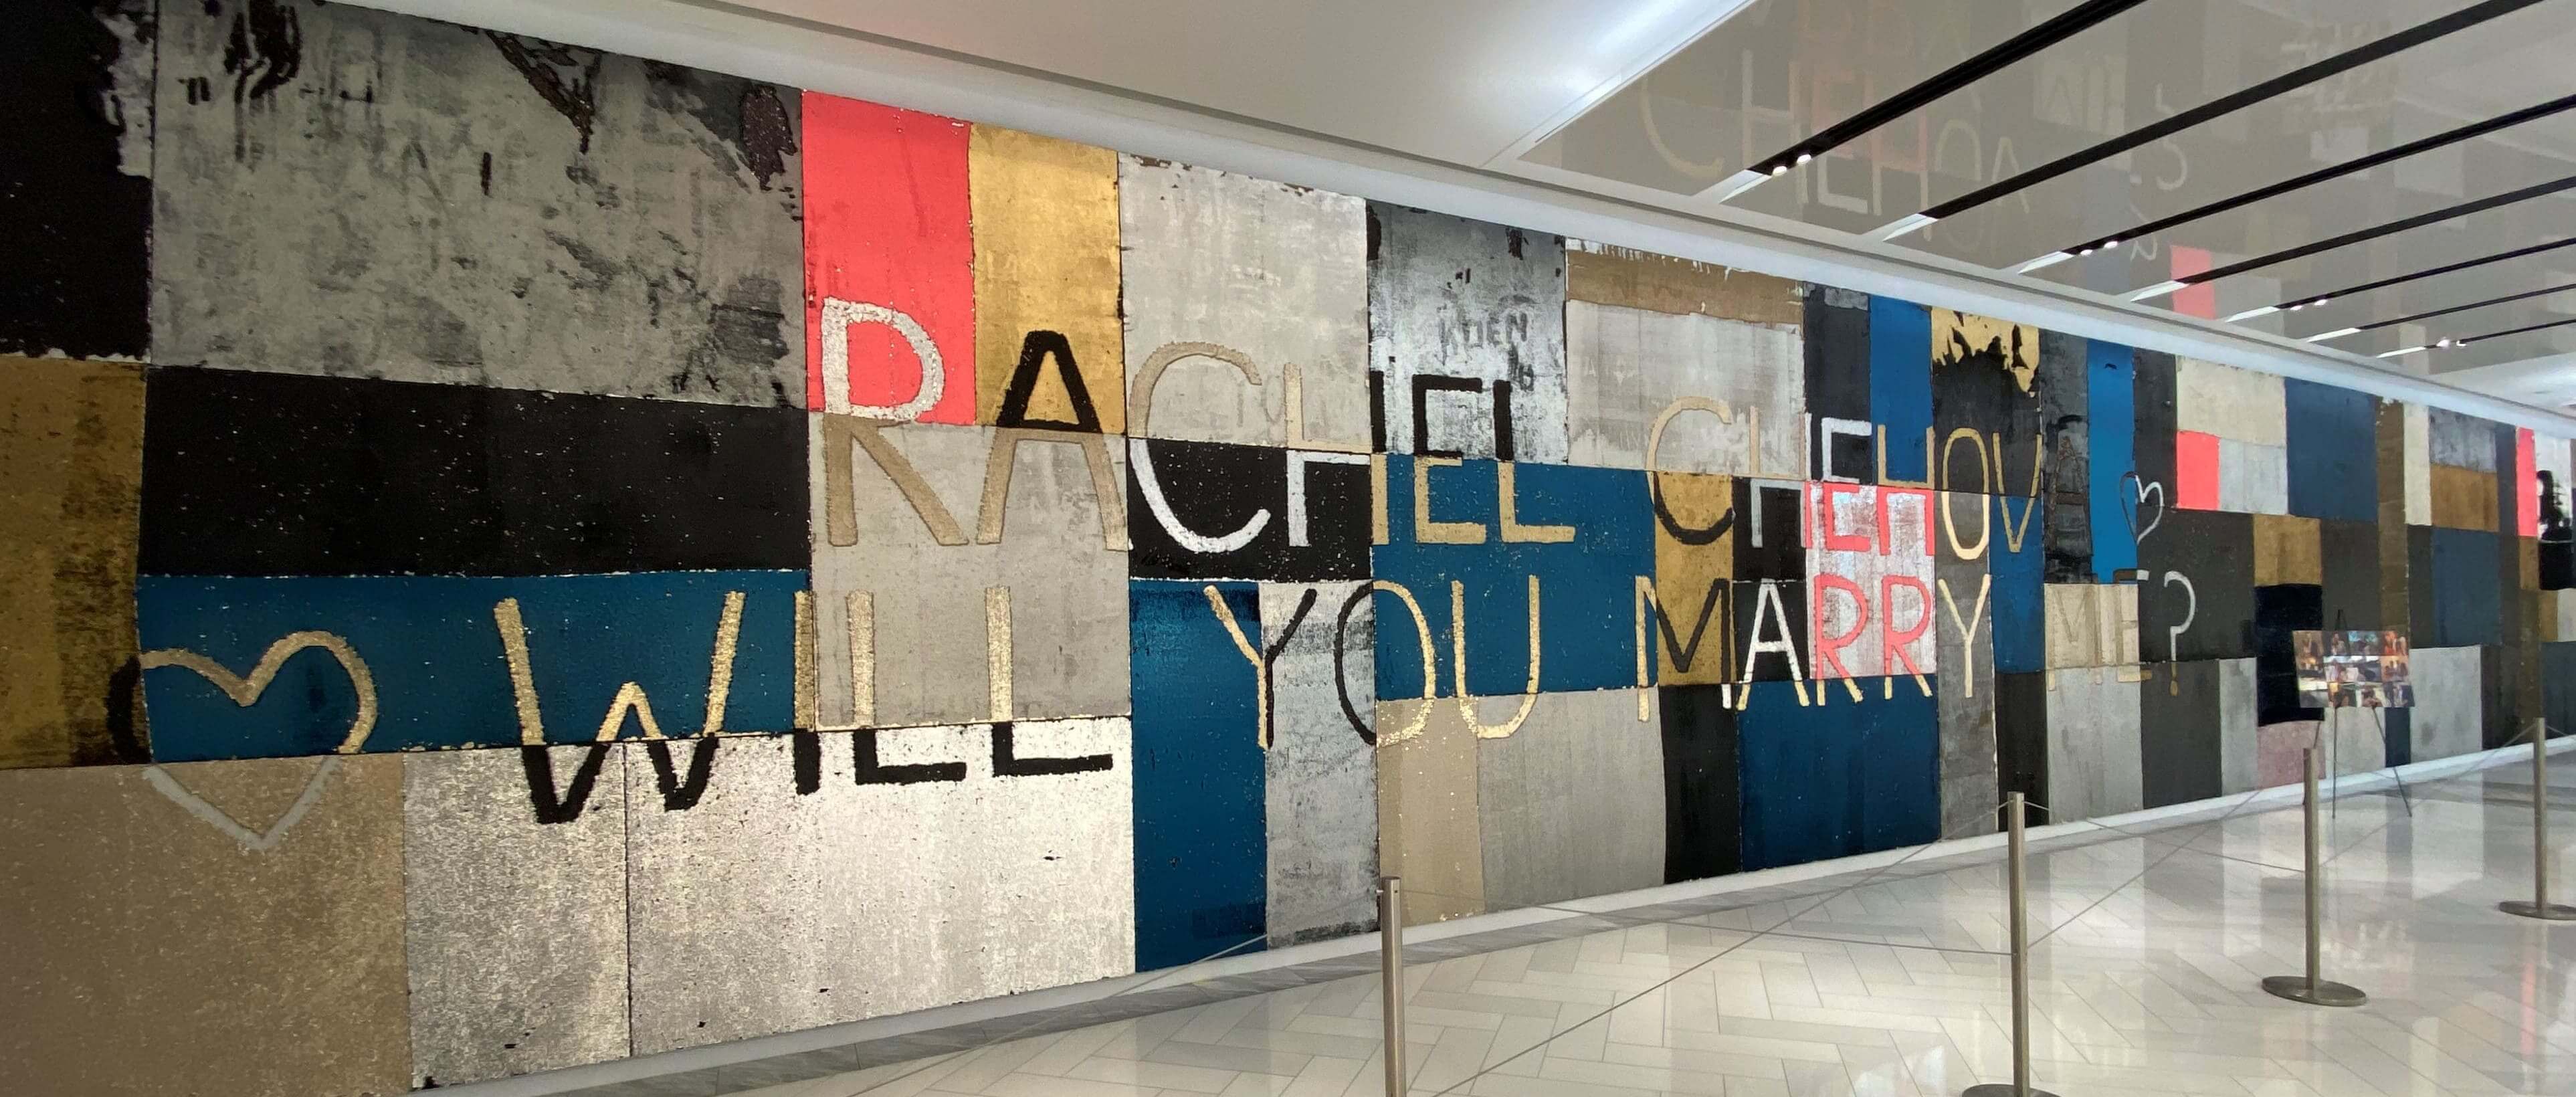 Rachel will you marry me designed on the sequin wall